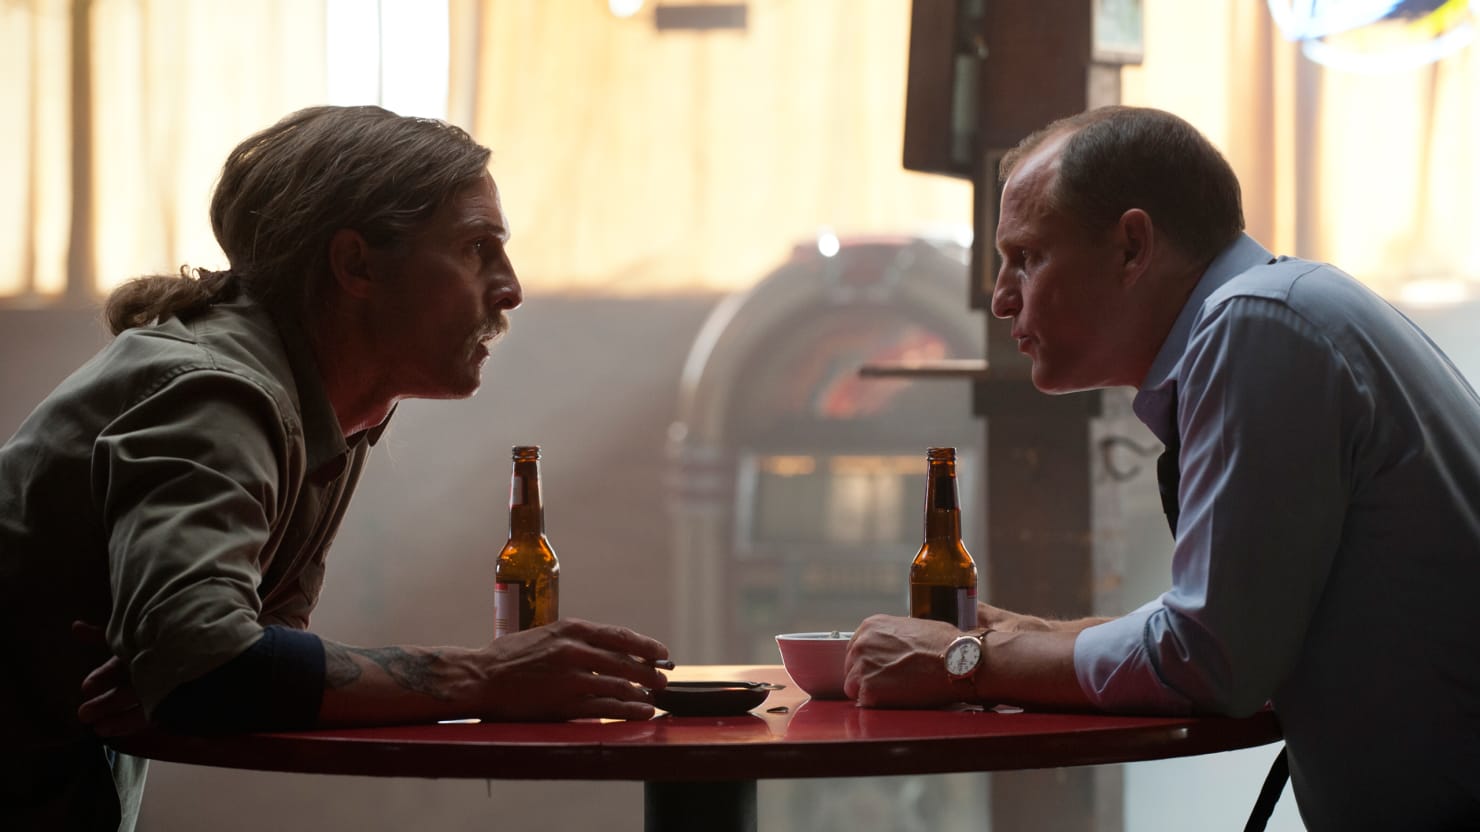 Rust cohle and marty фото 15